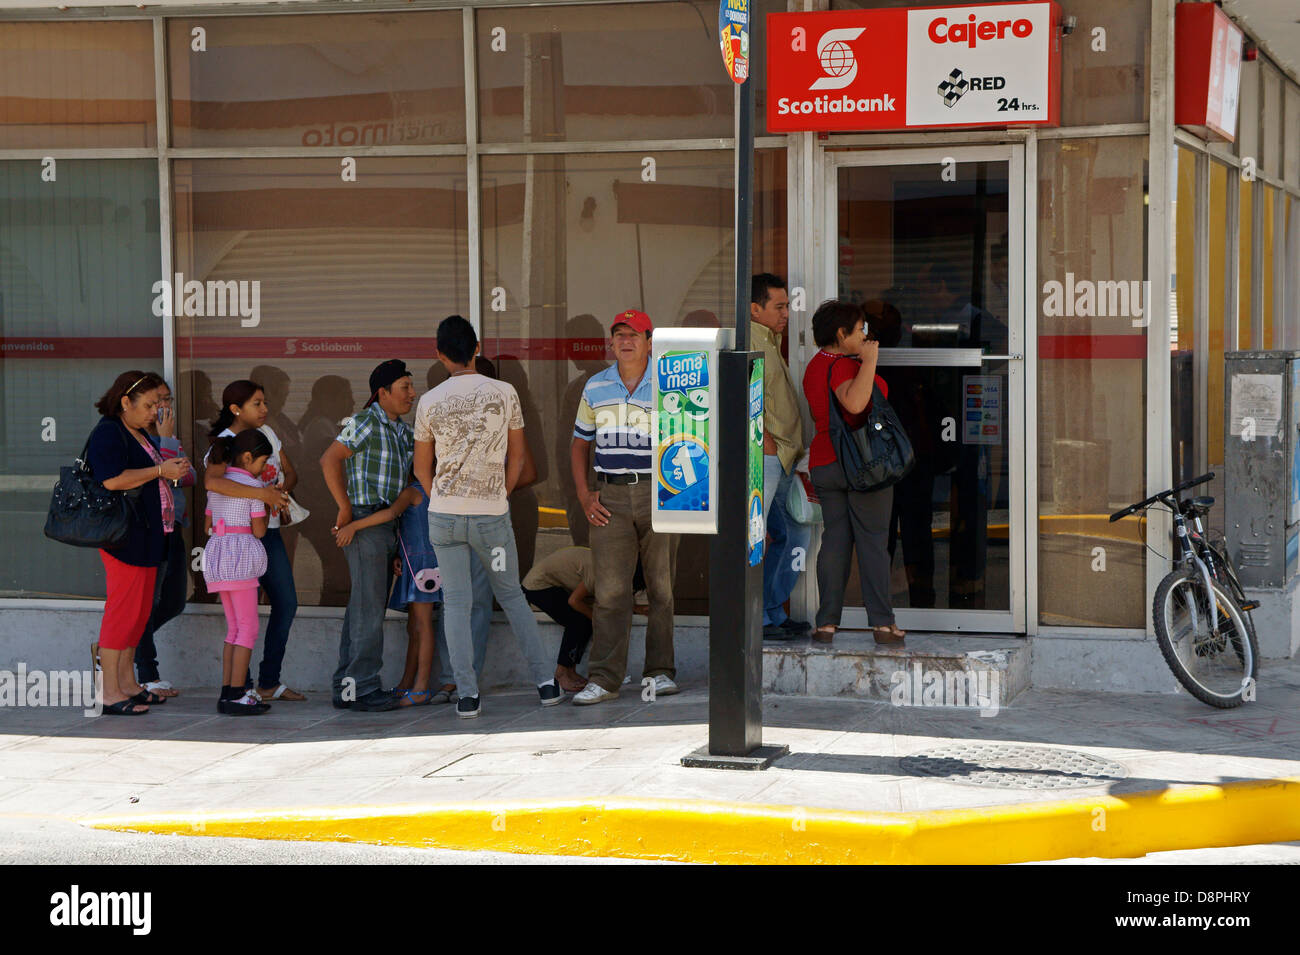 Mexican people lined up to use the atm outside a bank in Merida, Yucatan, Mexico Stock Photo